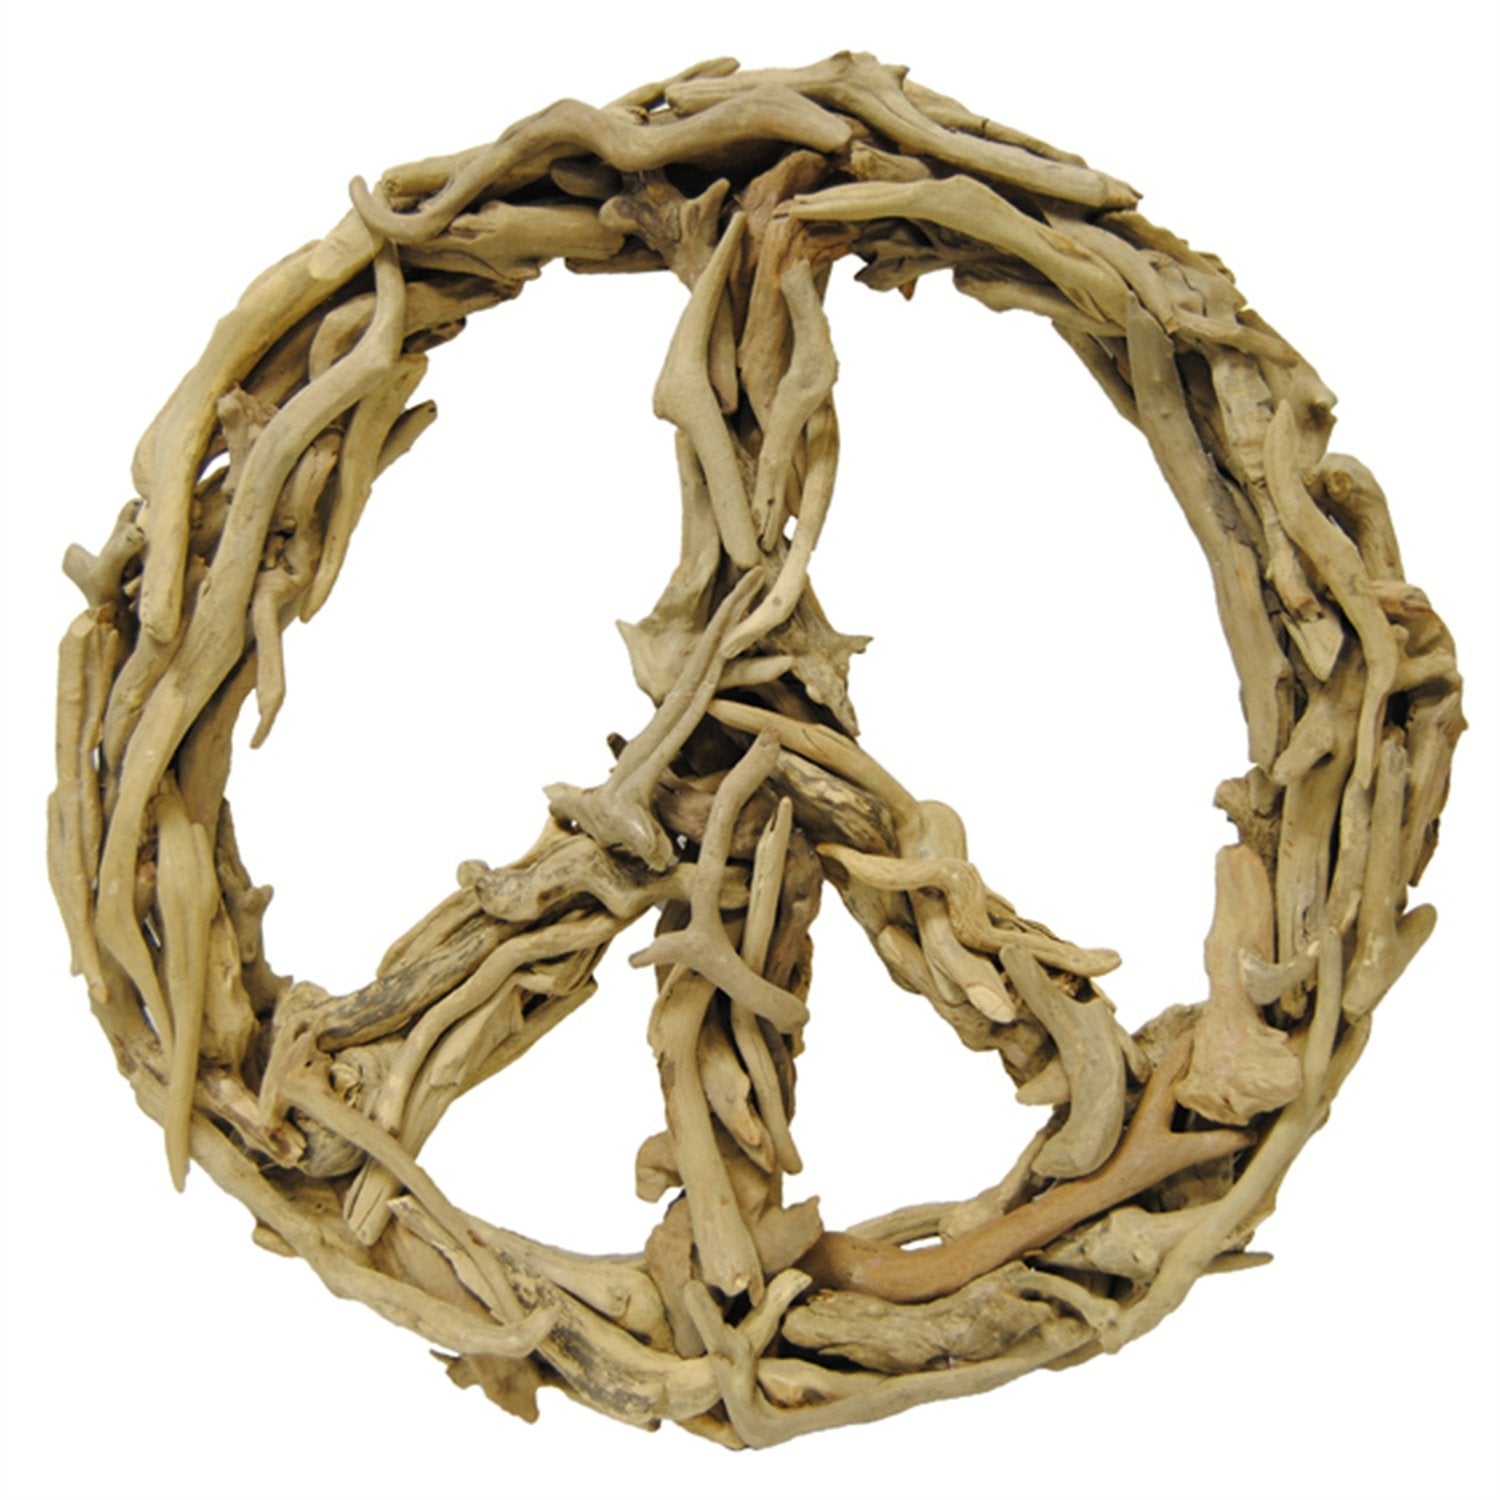 Driftwood - Small Peace Sign-Driftwood-Jack and Jill Boutique